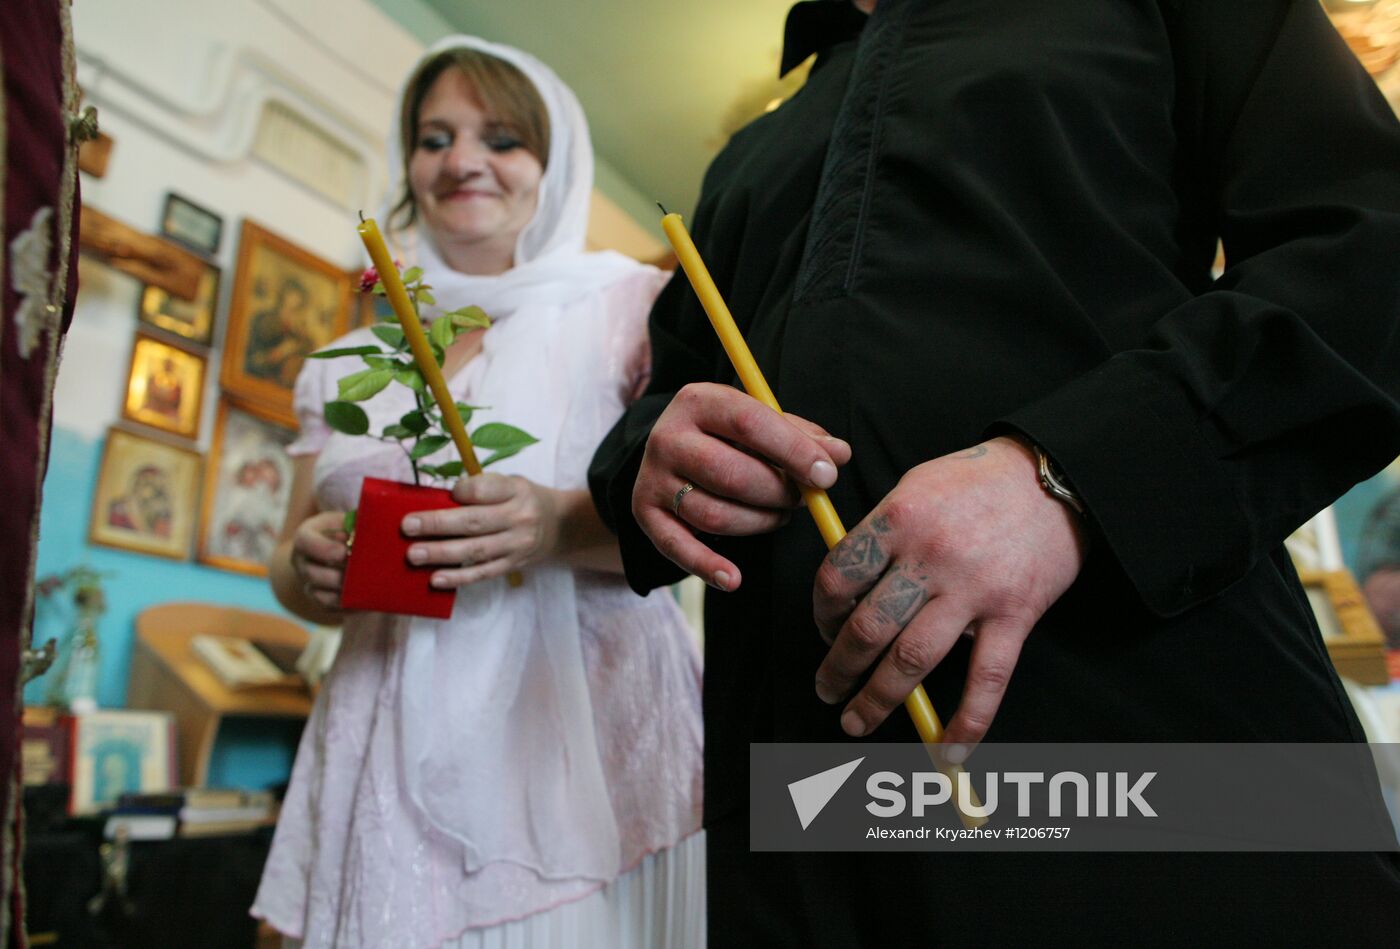 Wedding service in strict-regime penal colony